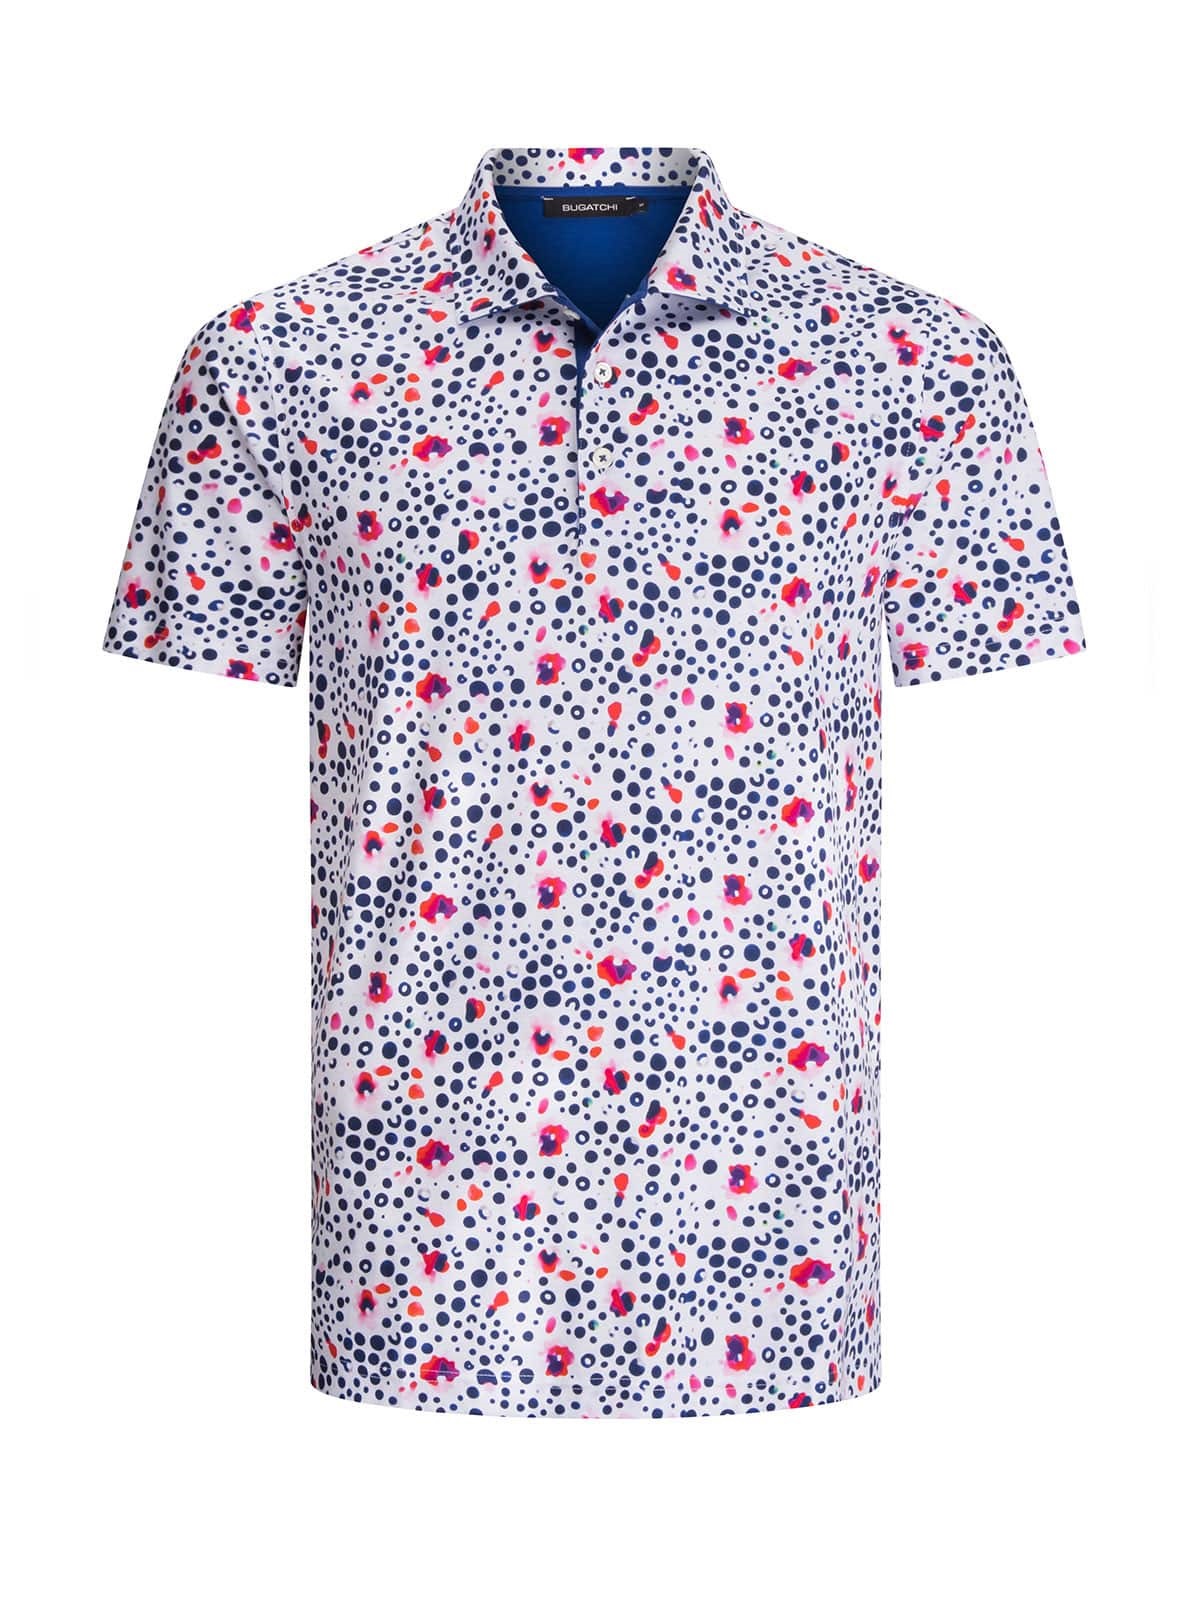 Sunny and Stylish Labor Day Weekend Outfits, Al Fresco Dining BBQ style, Bugatchi short sleeve men's print polo